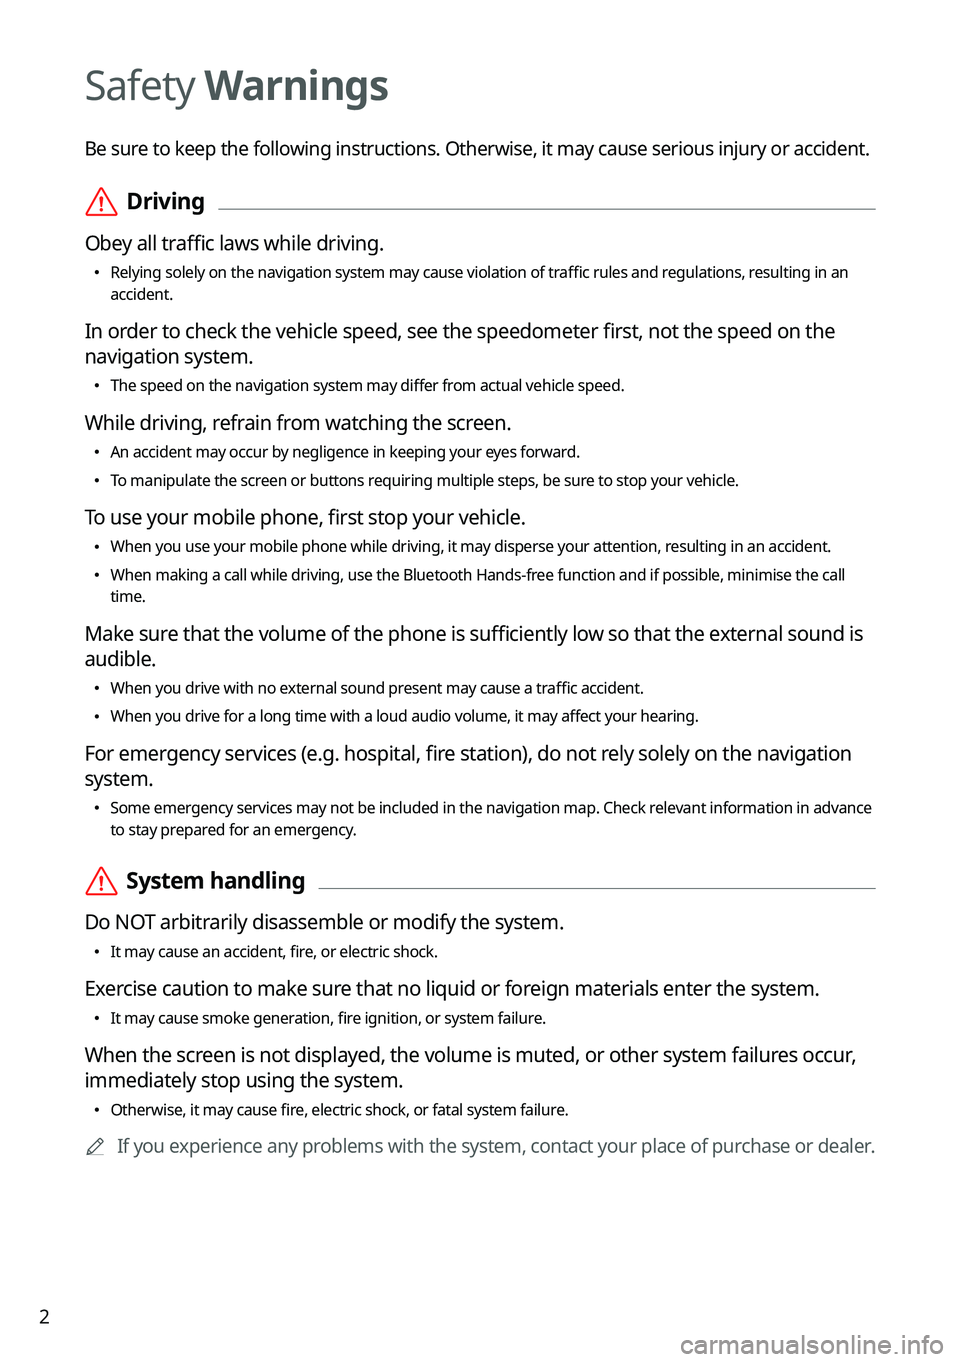 KIA SOUL 2023  Quick Reference Guide 2
Safety Warnings
Be sure to keep the following instructions. Otherwise, it may cause serious injury or accident.
 ÝDriving
Obey all traffic laws while driving.
 •
Relying solely on the navigation 